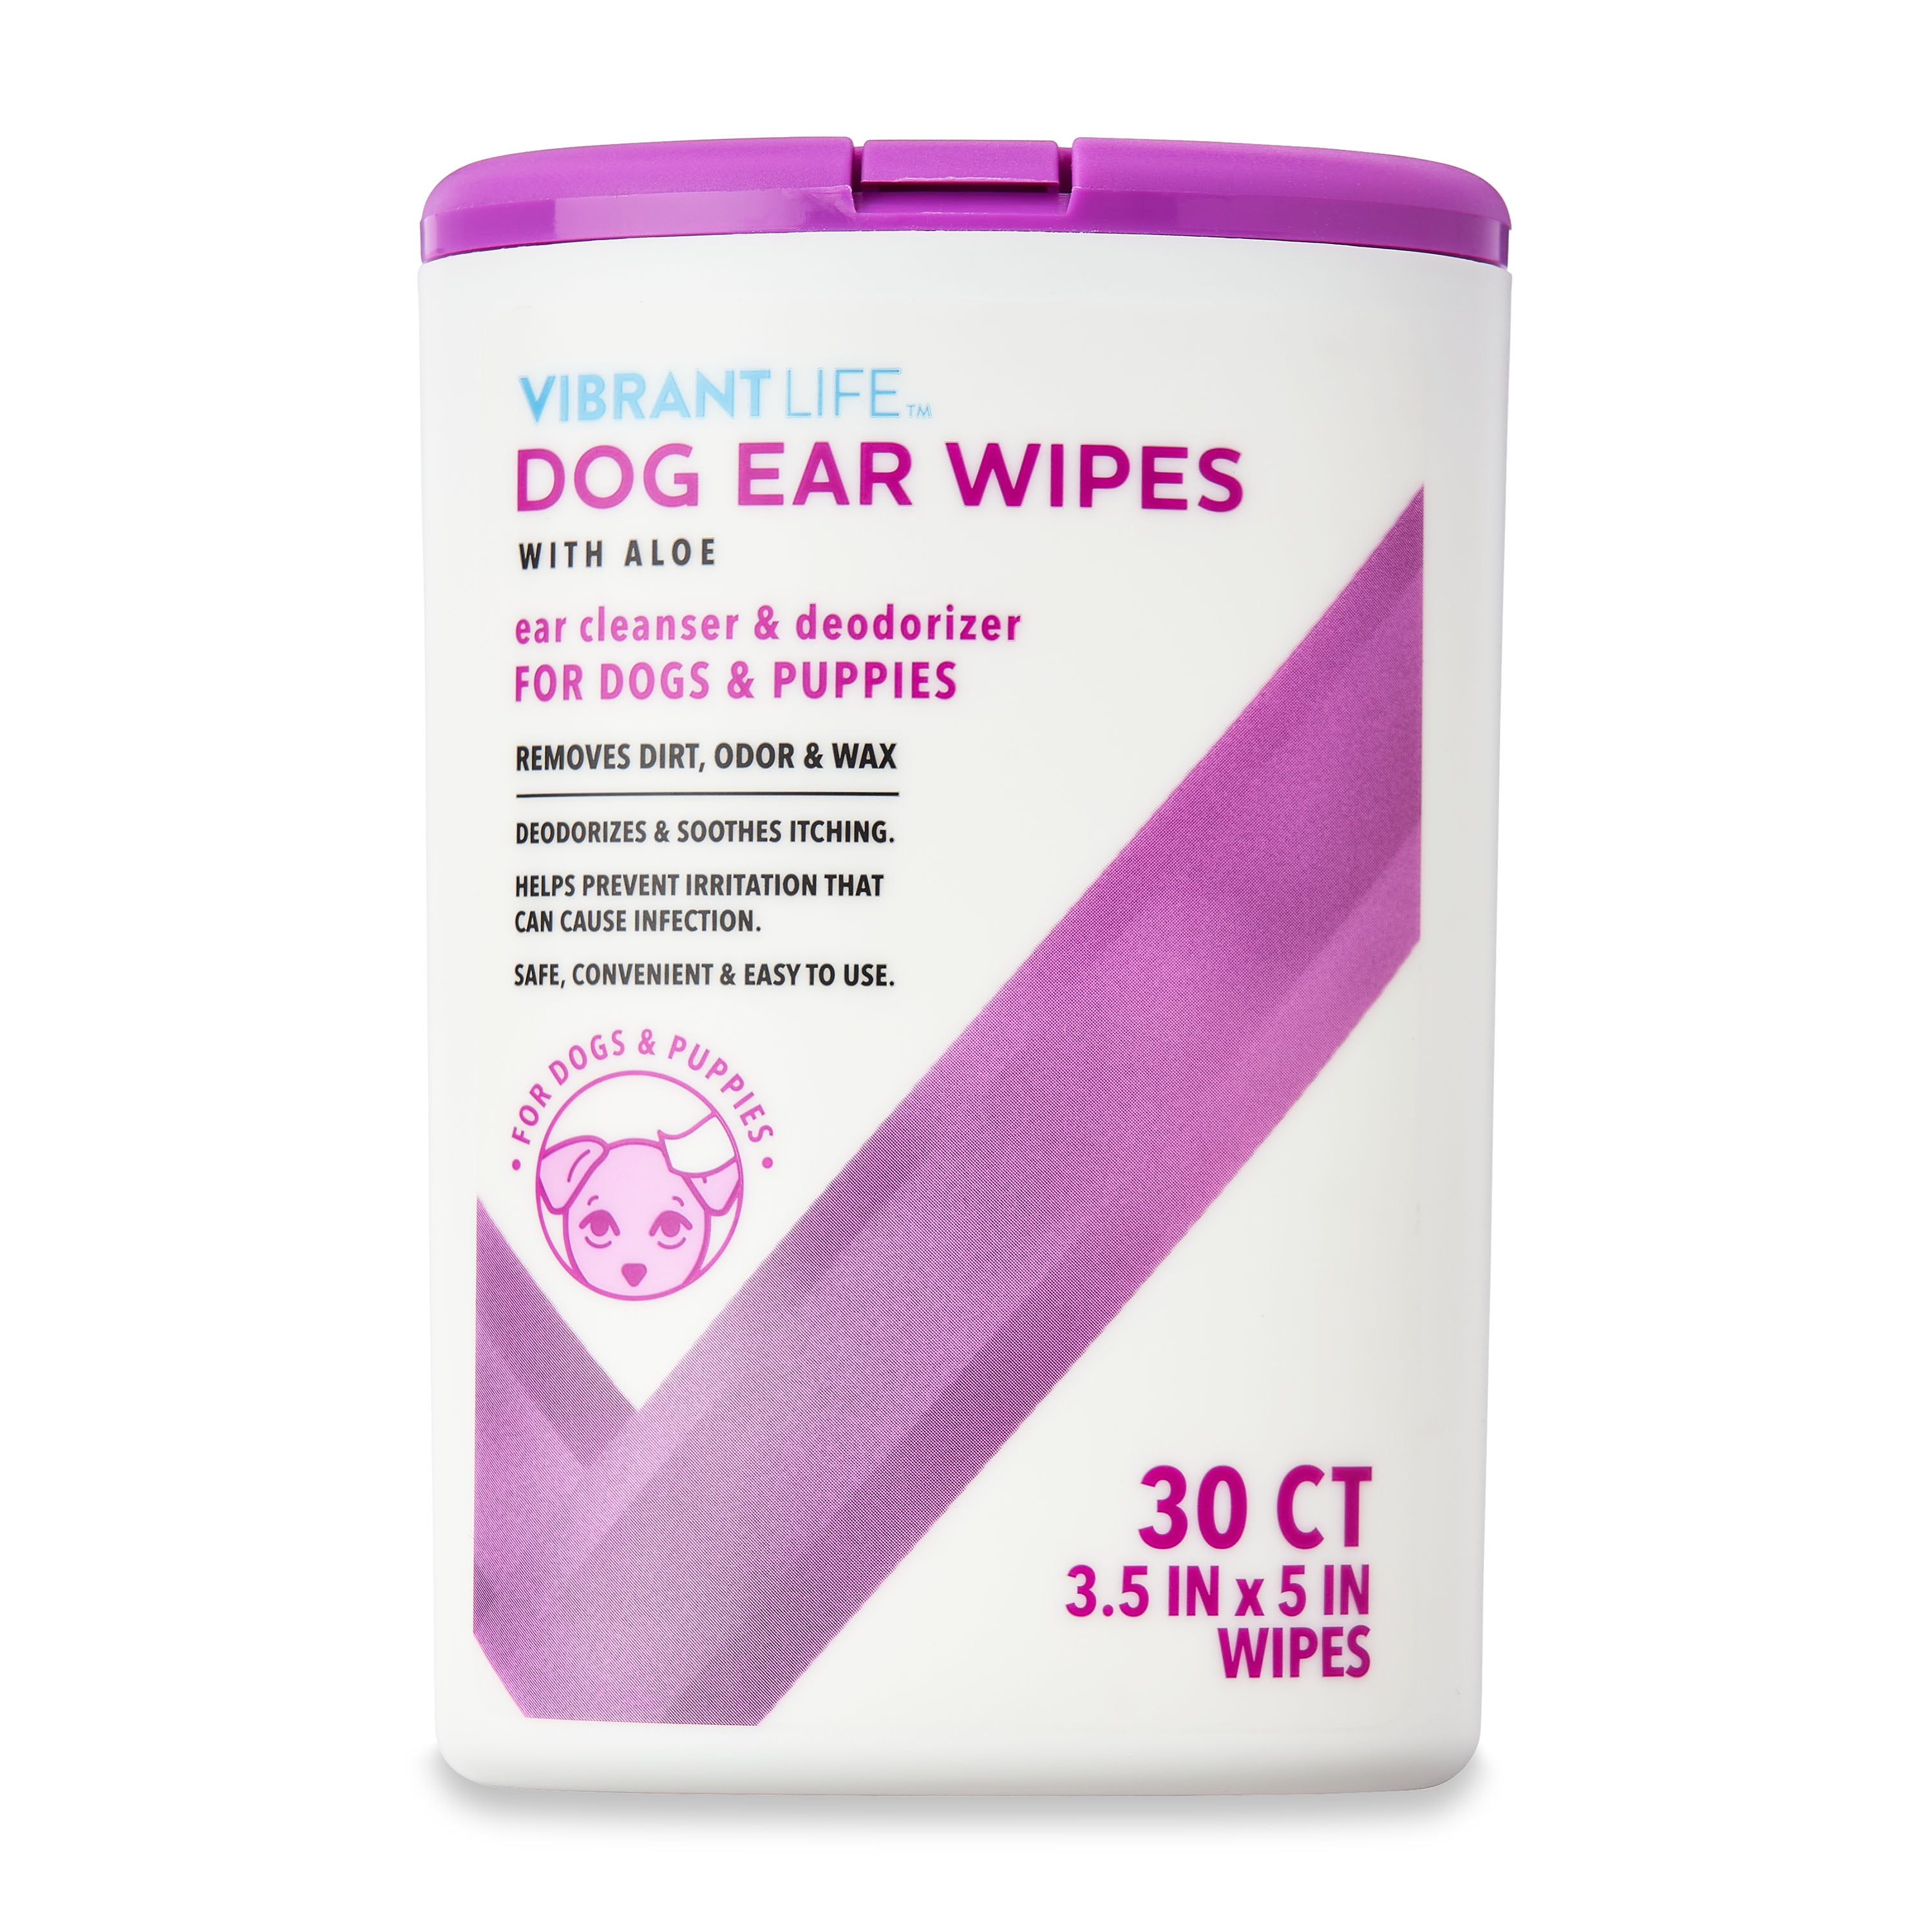 Vibrant Life Dog Ear Wipes with Aloe, 30 Count